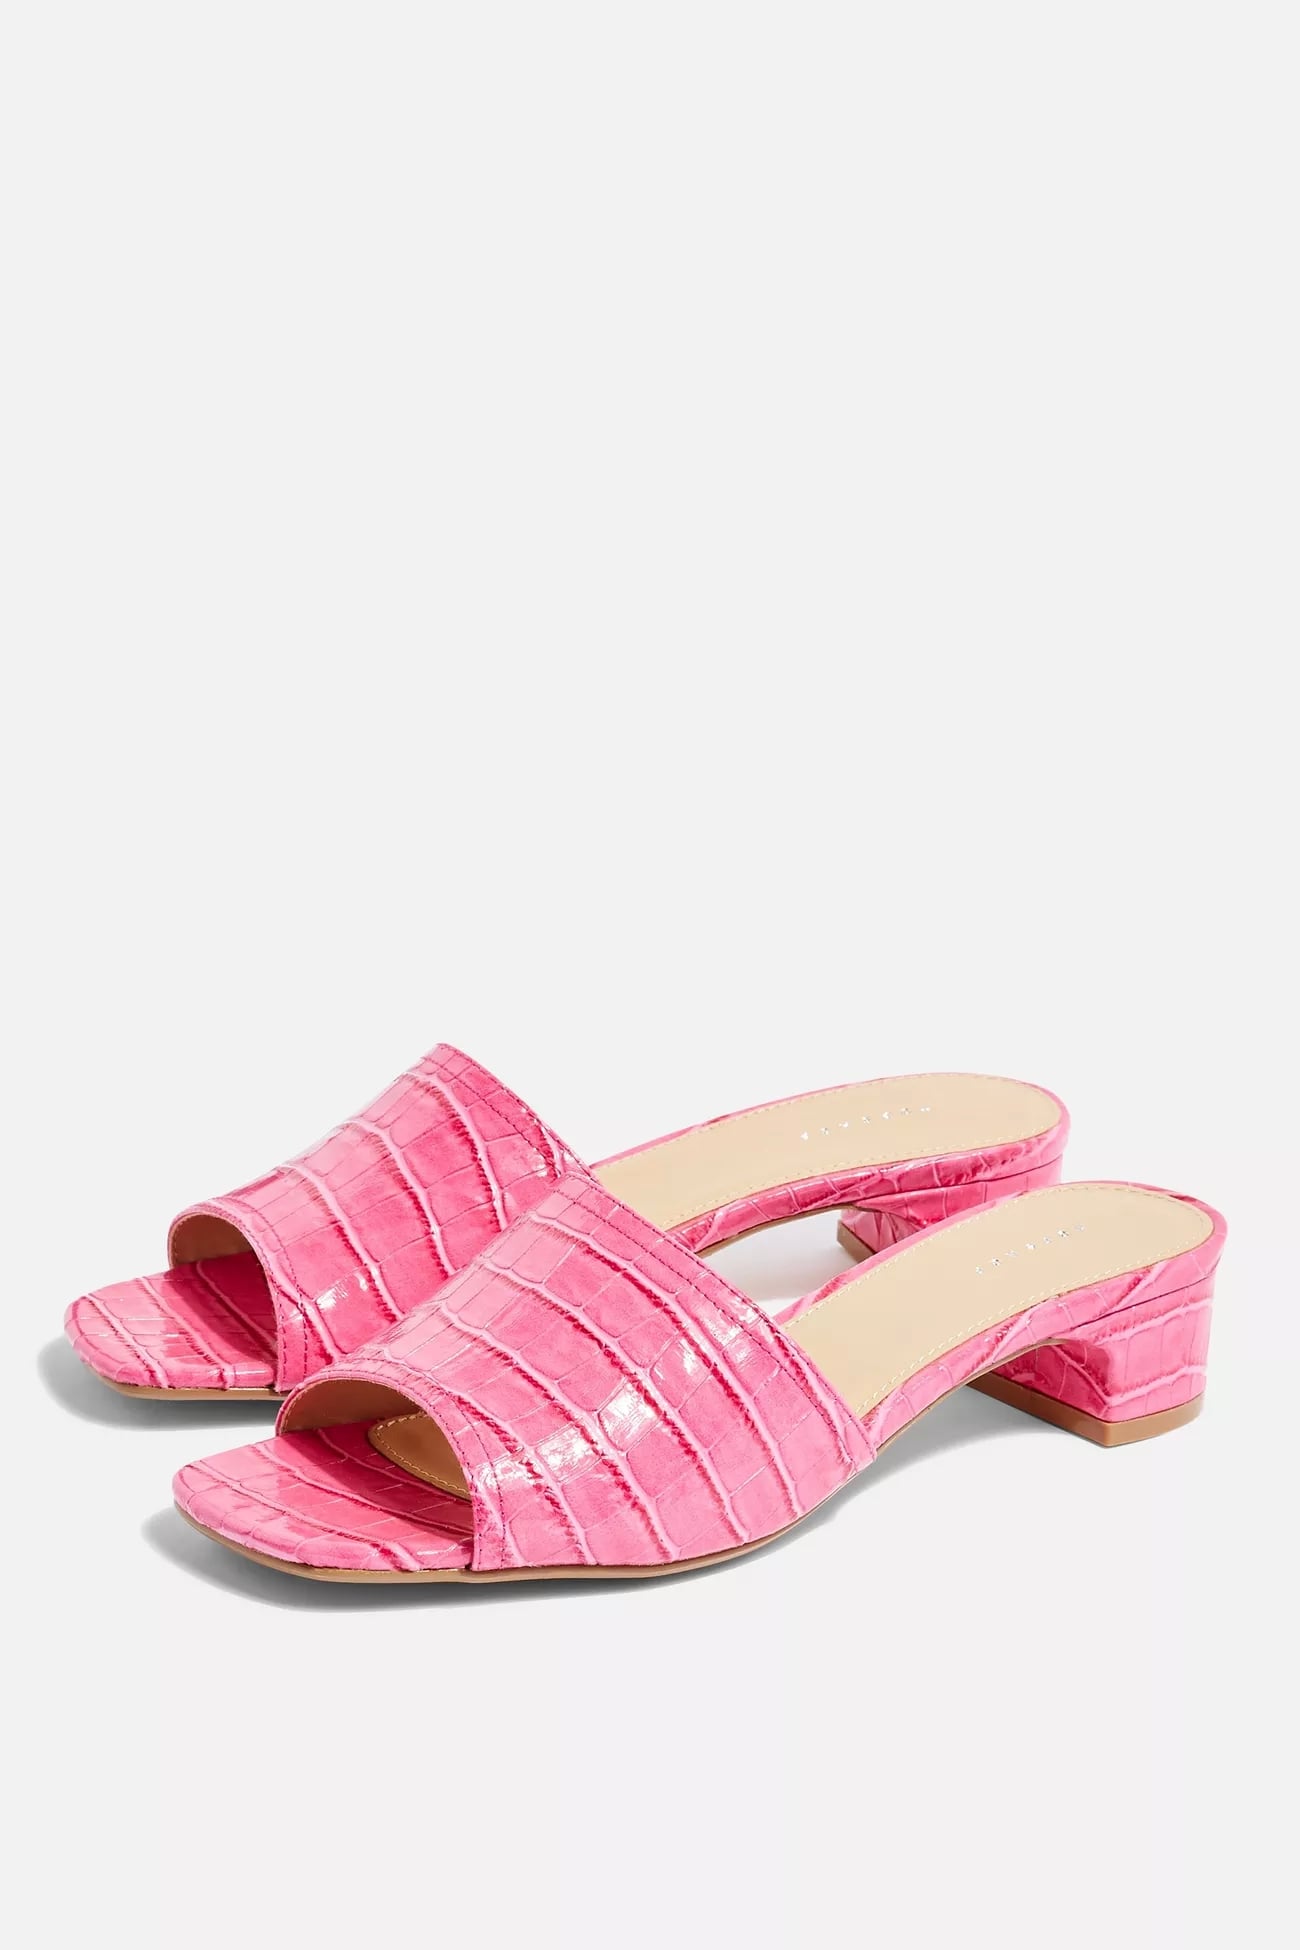 montering Astrolabe vækstdvale Topshop DIva Pink Mules | From Dresses to Sandals, These Are the 50 Hottest  Steals For Under $50 Right Now | POPSUGAR Fashion UK Photo 5